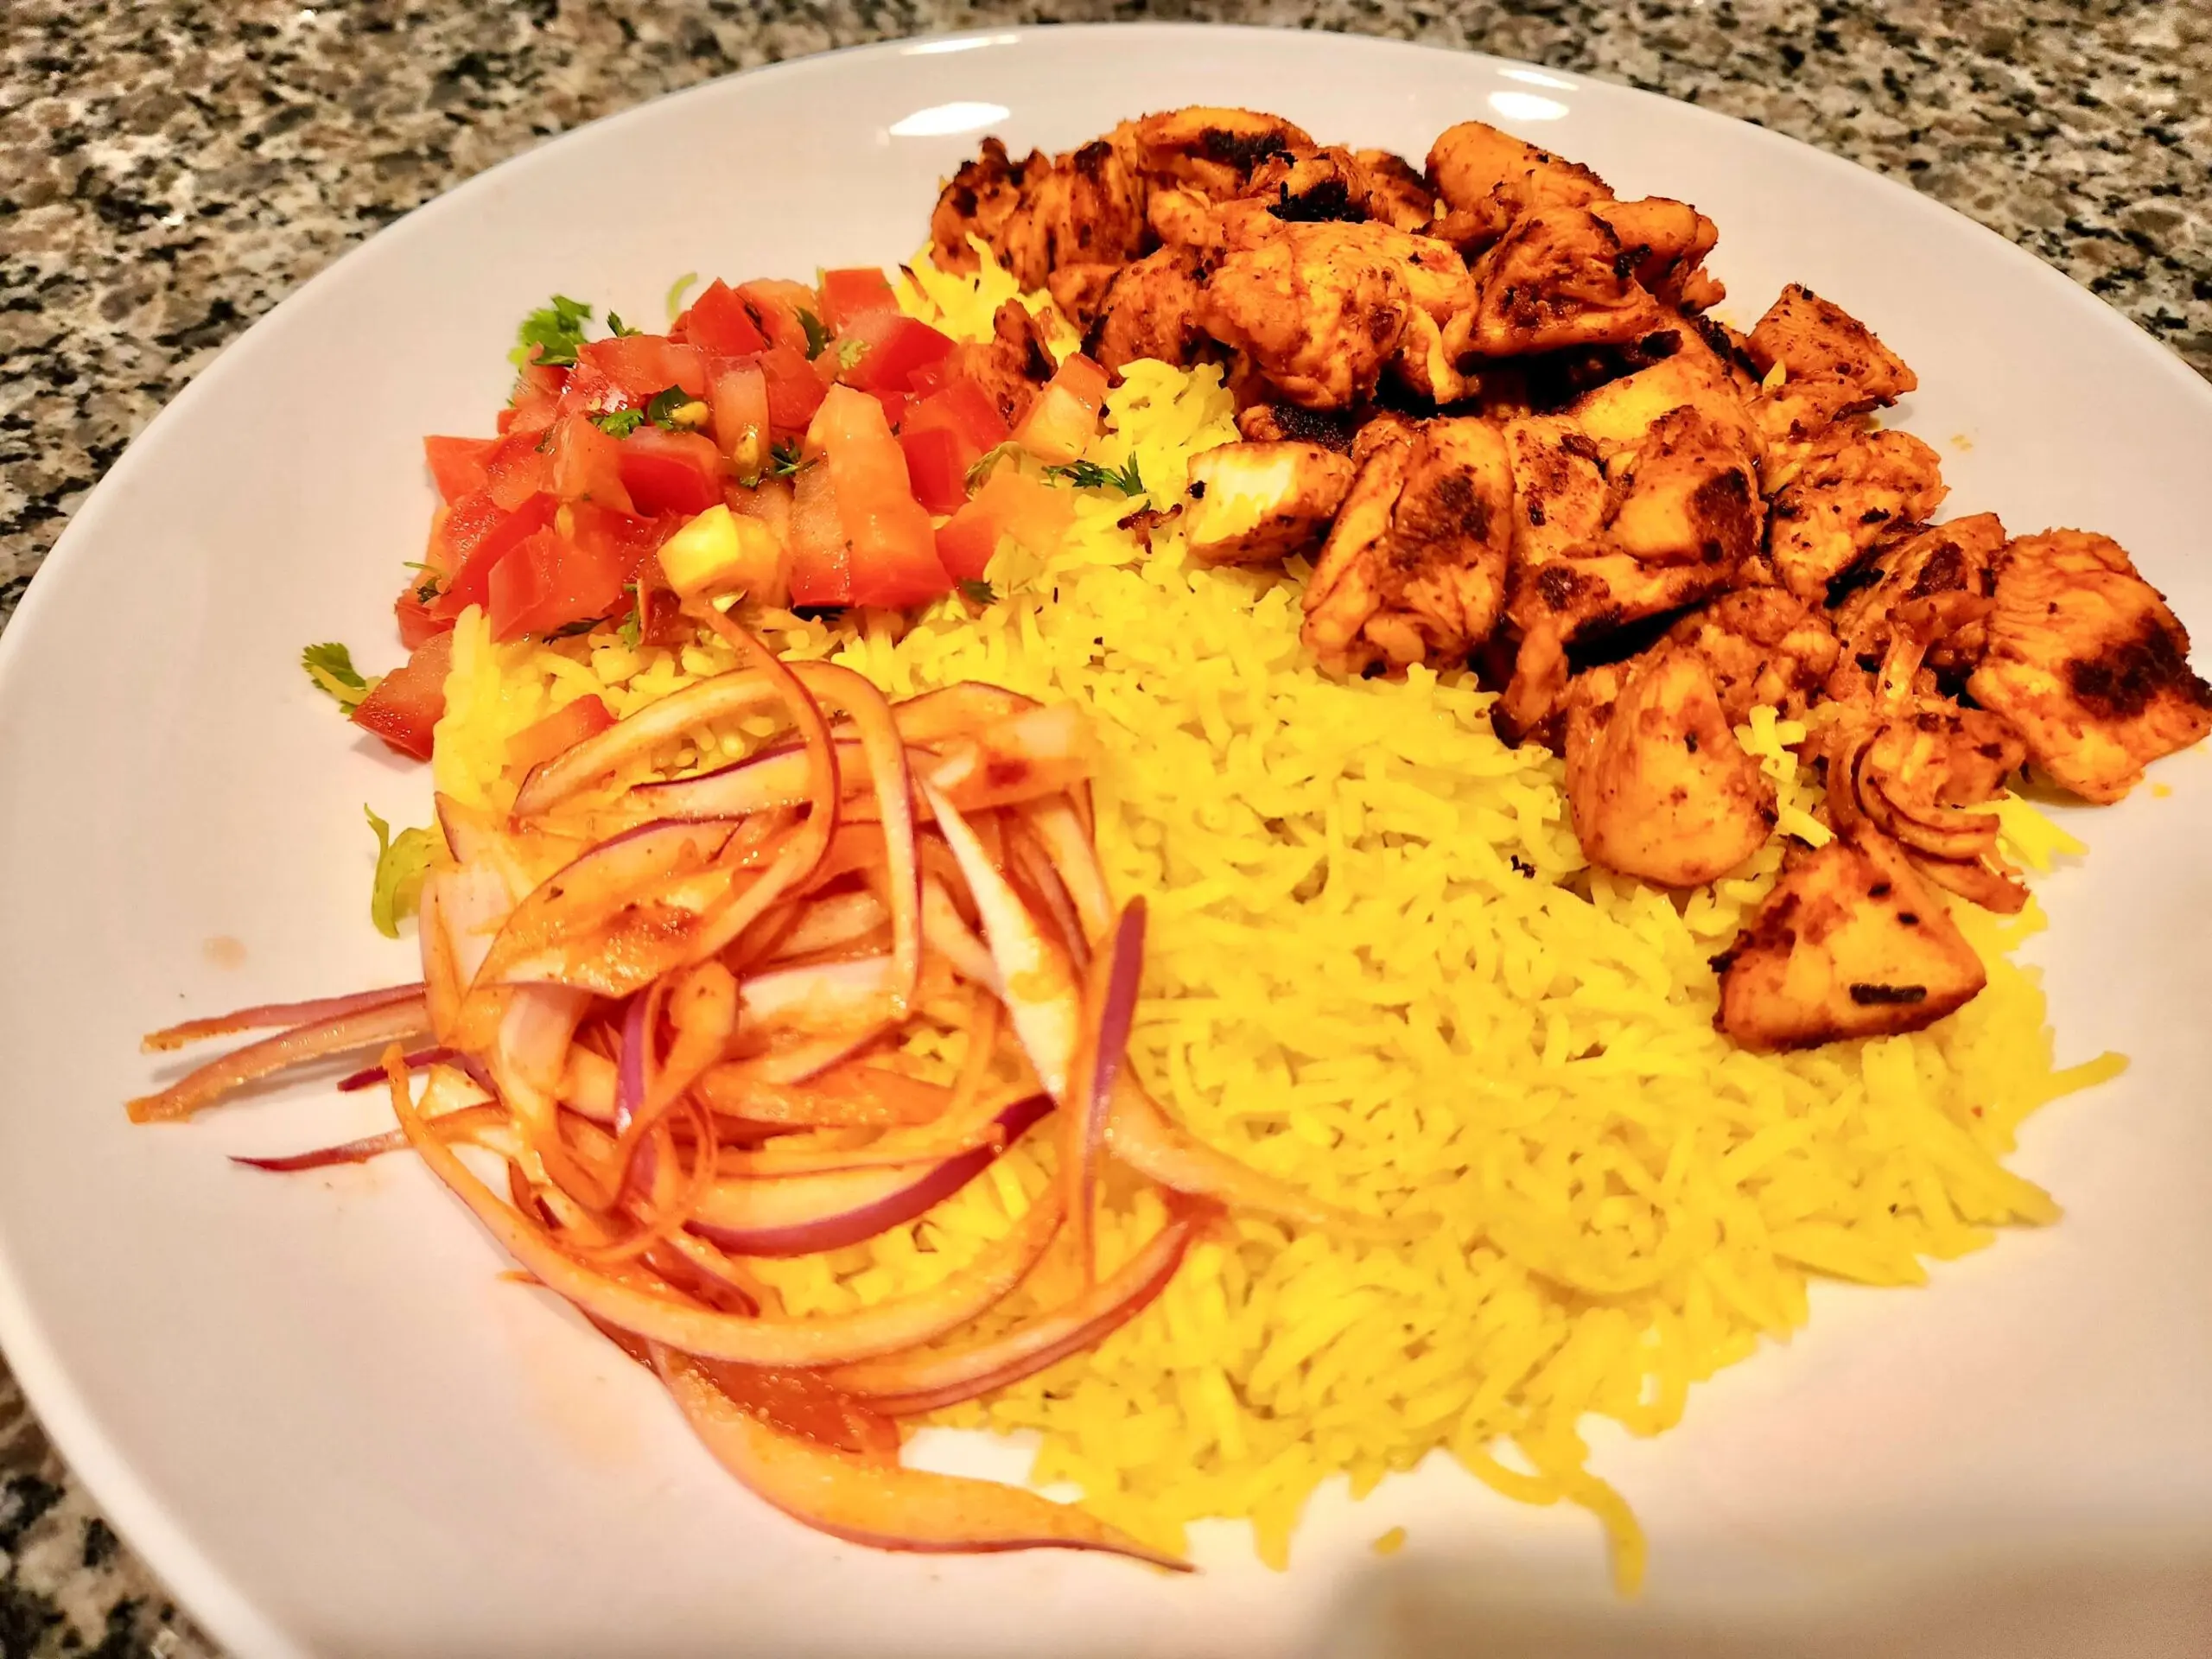 Mediterranean Chicken and Rice with Spicy Onions and Tomato Salad